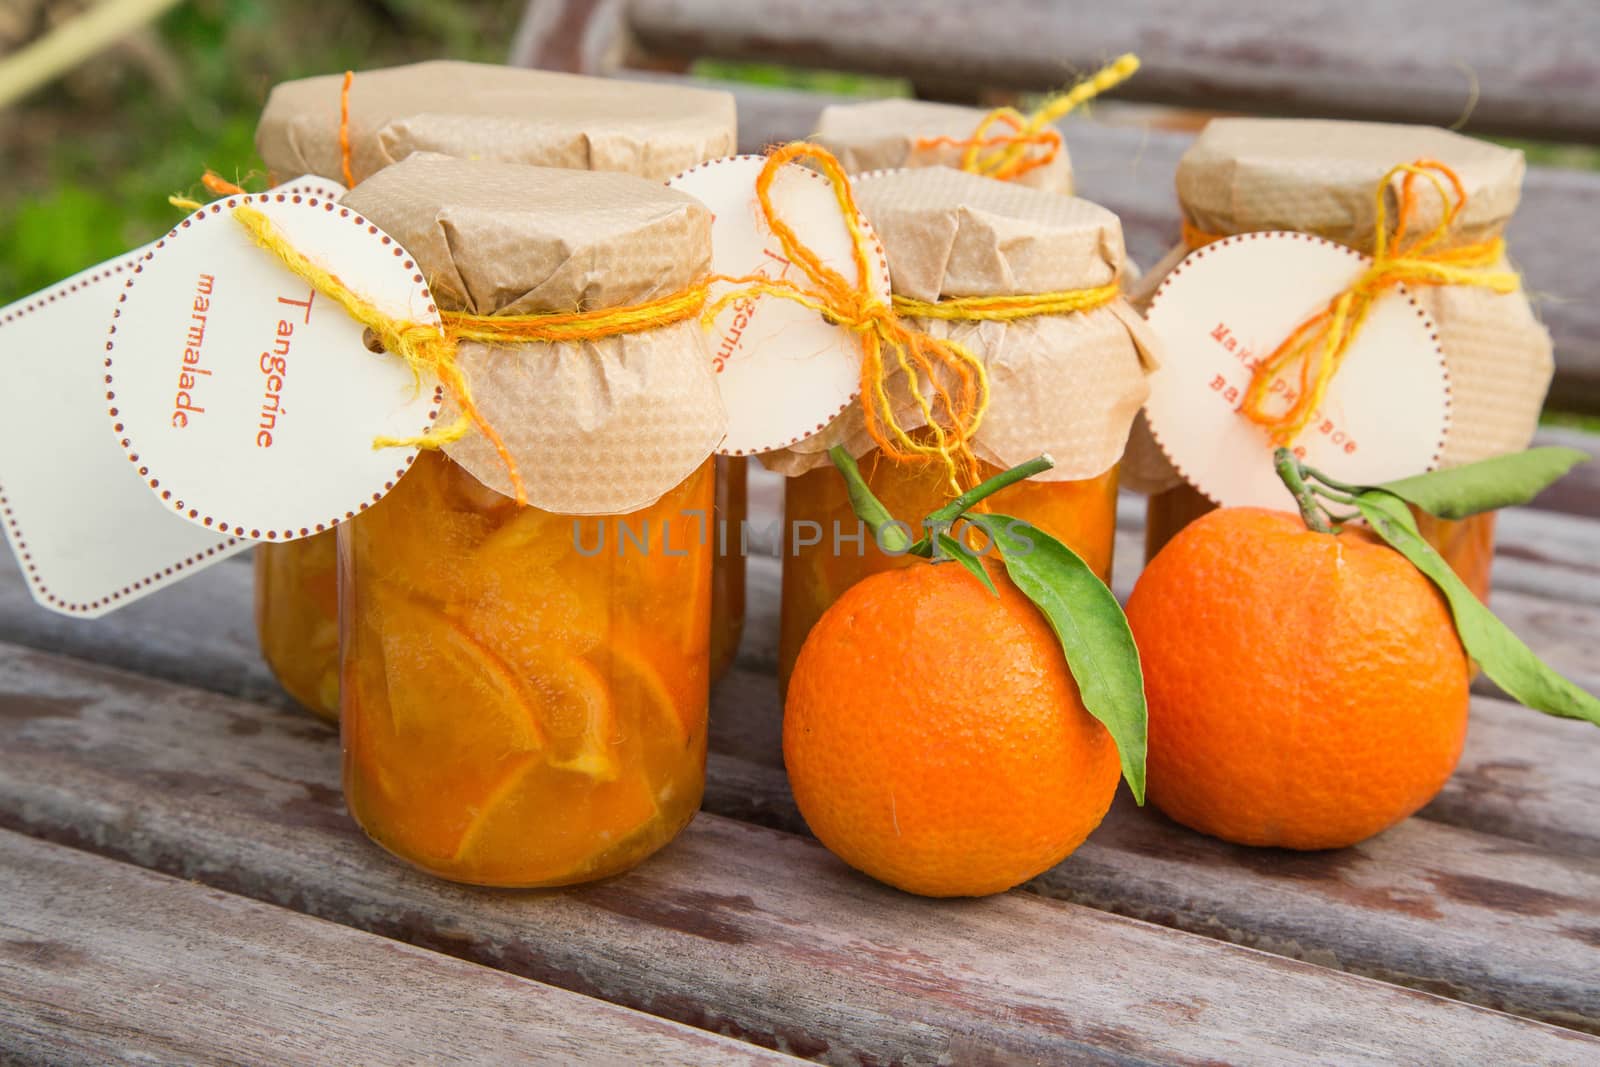 Homemade tangerine marmalade and fresh tangerines on the wooden surface